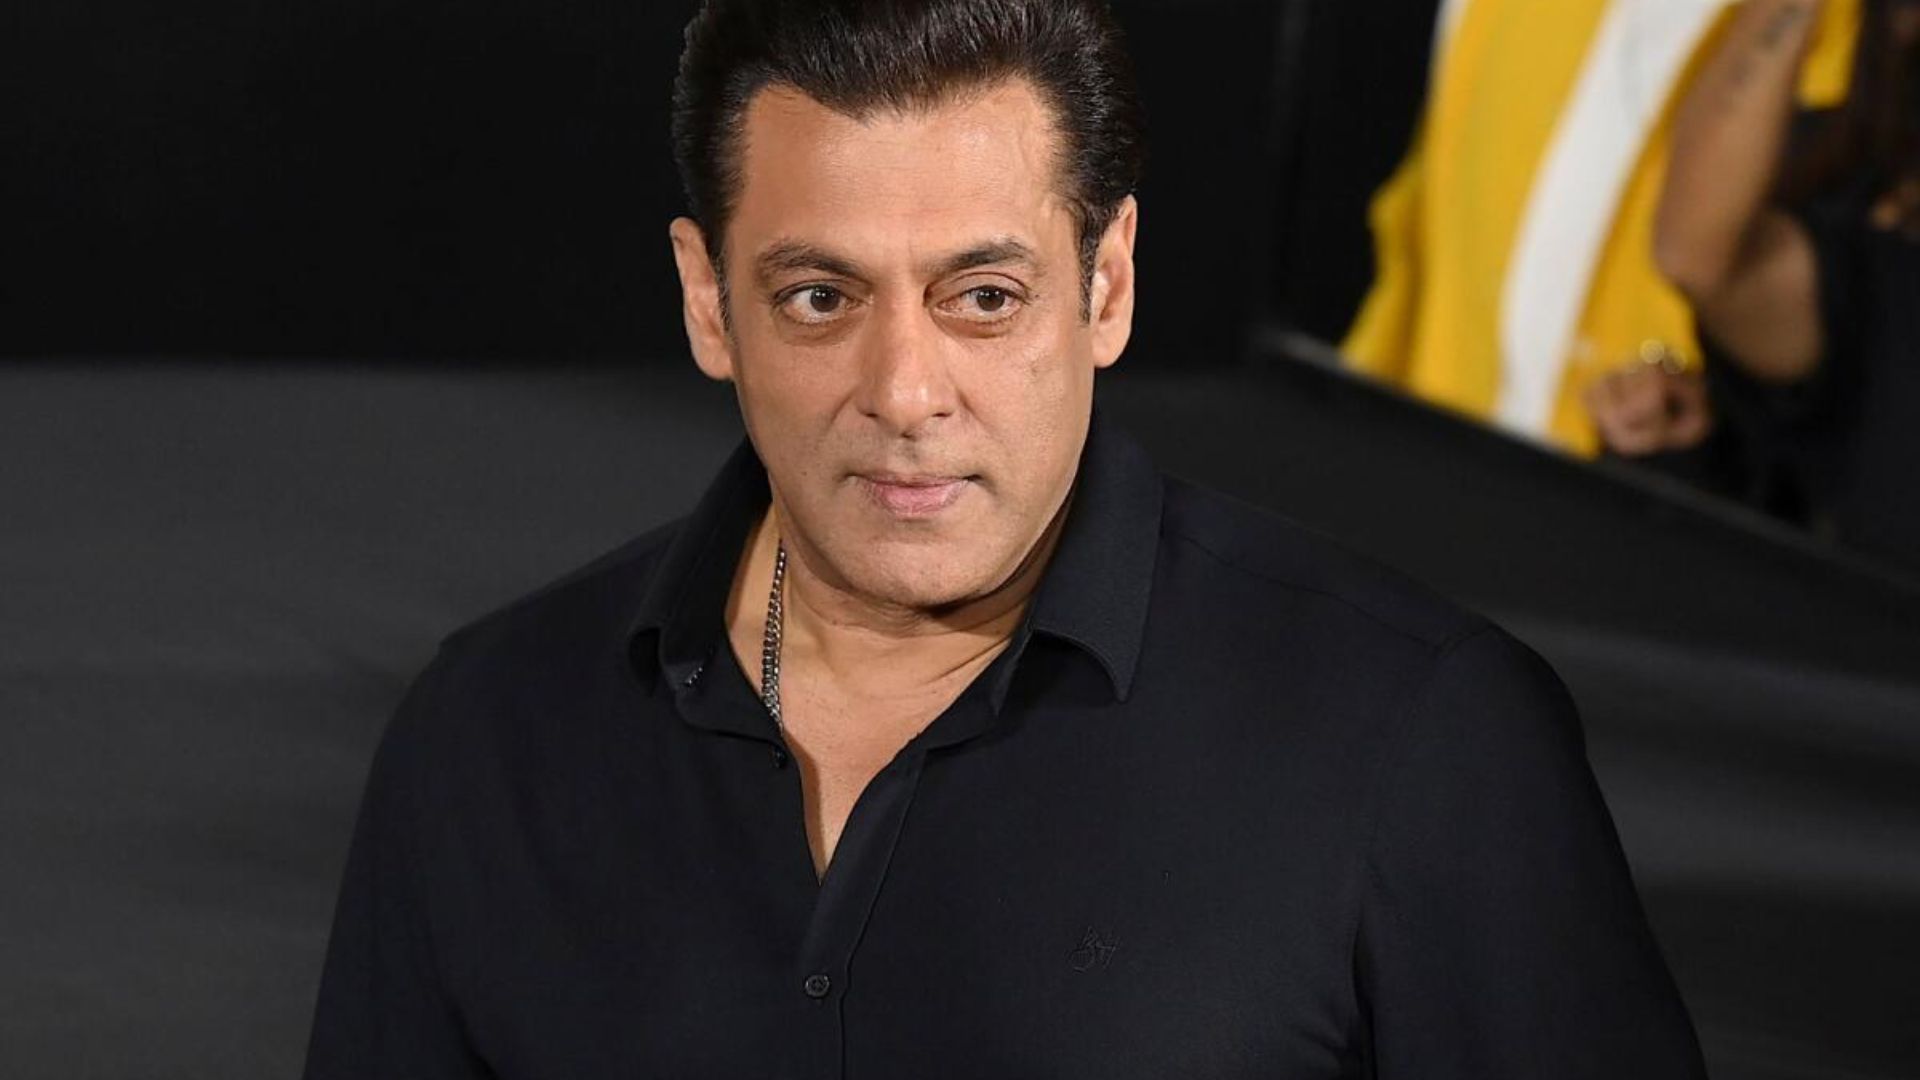 Salman Khan’s Security Threats: All You Need To Know